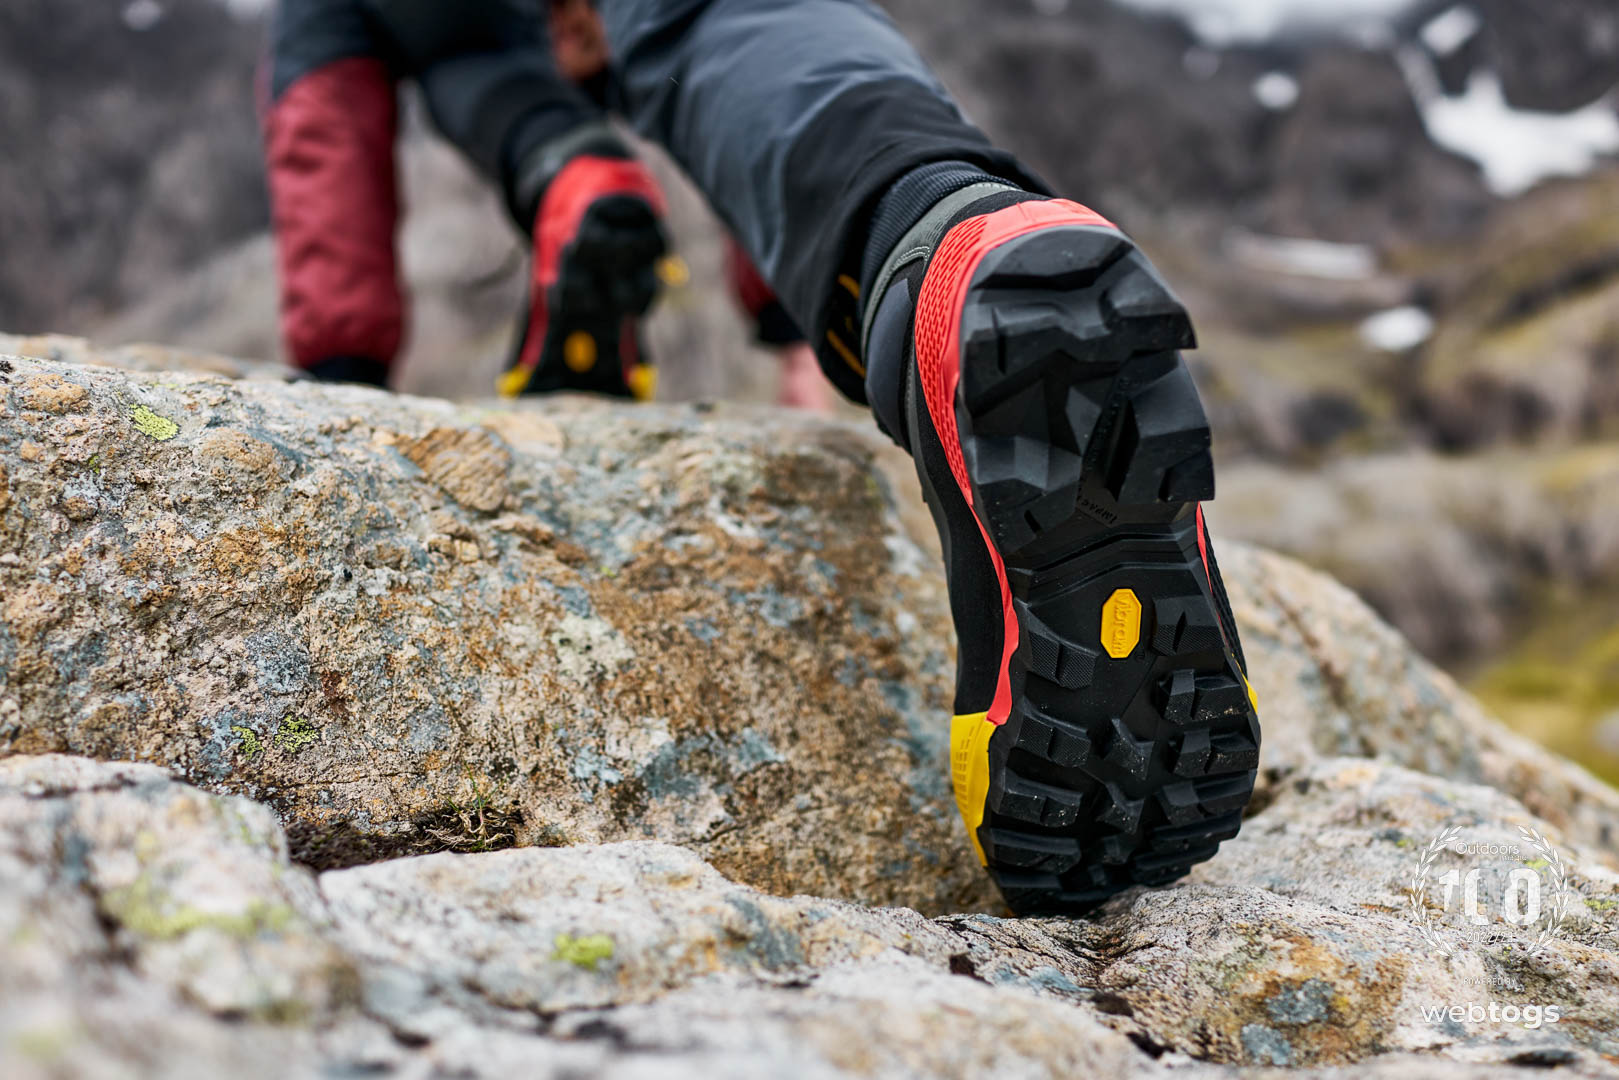 La Sportiva Aequilibrium ST GTX Mountaineering boots | Review